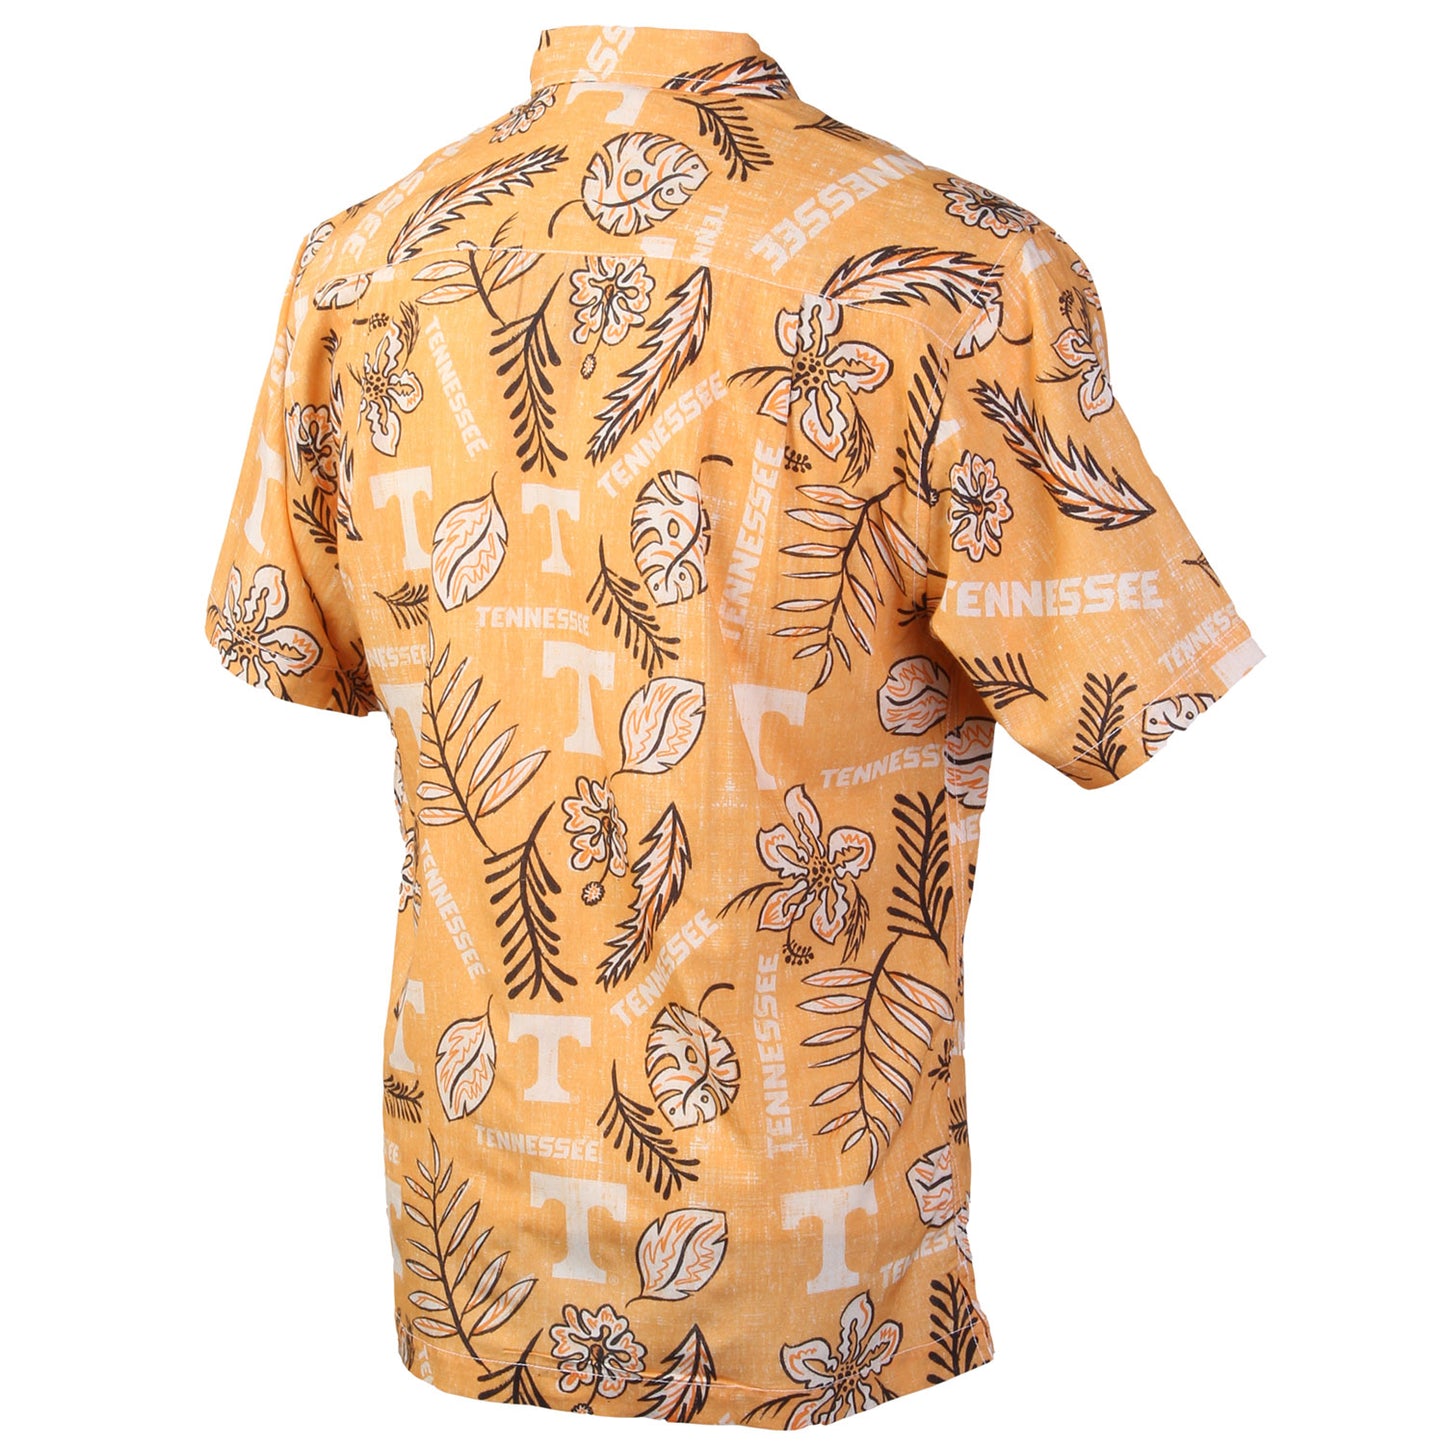 Tennessee Volunteers Wes and Willy Mens College Hawaiian Short Sleeve Button Down Shirt Vintage Floral